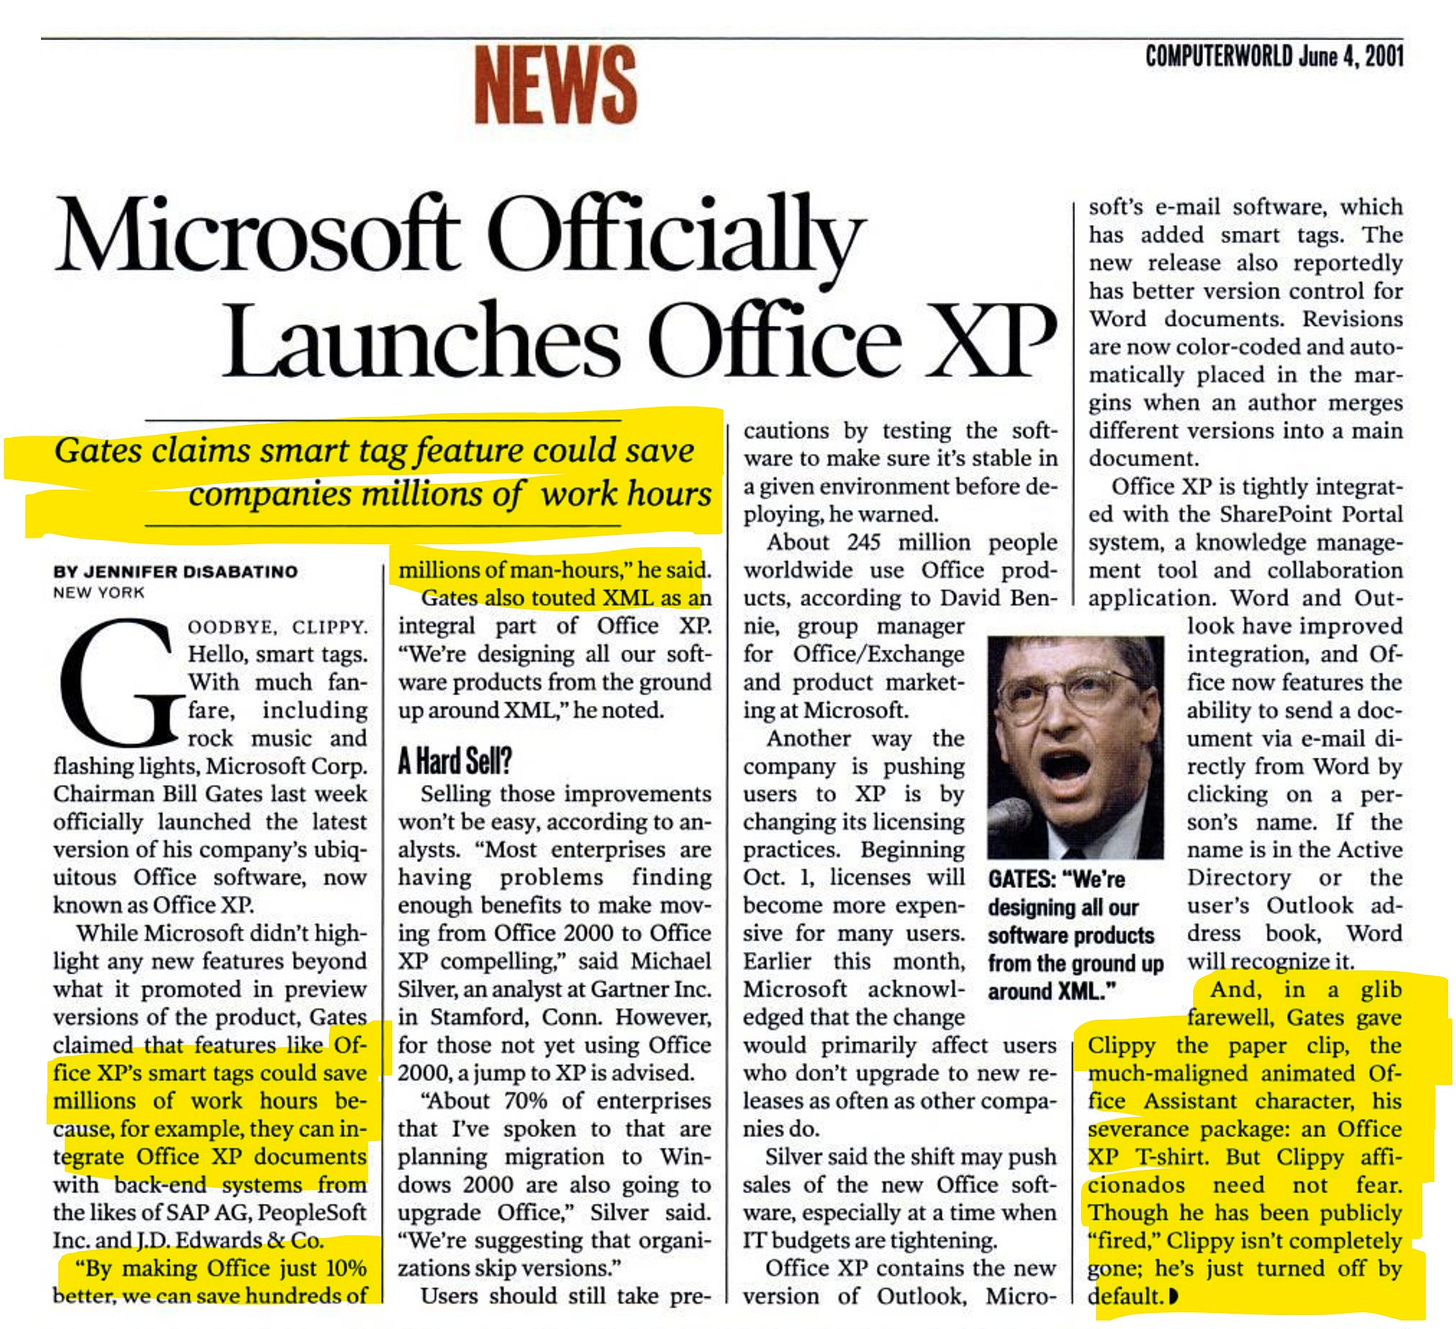 Microsoft Officially Launches Office XP: "Gates claims smar tag feature could save companies millions of work hours"